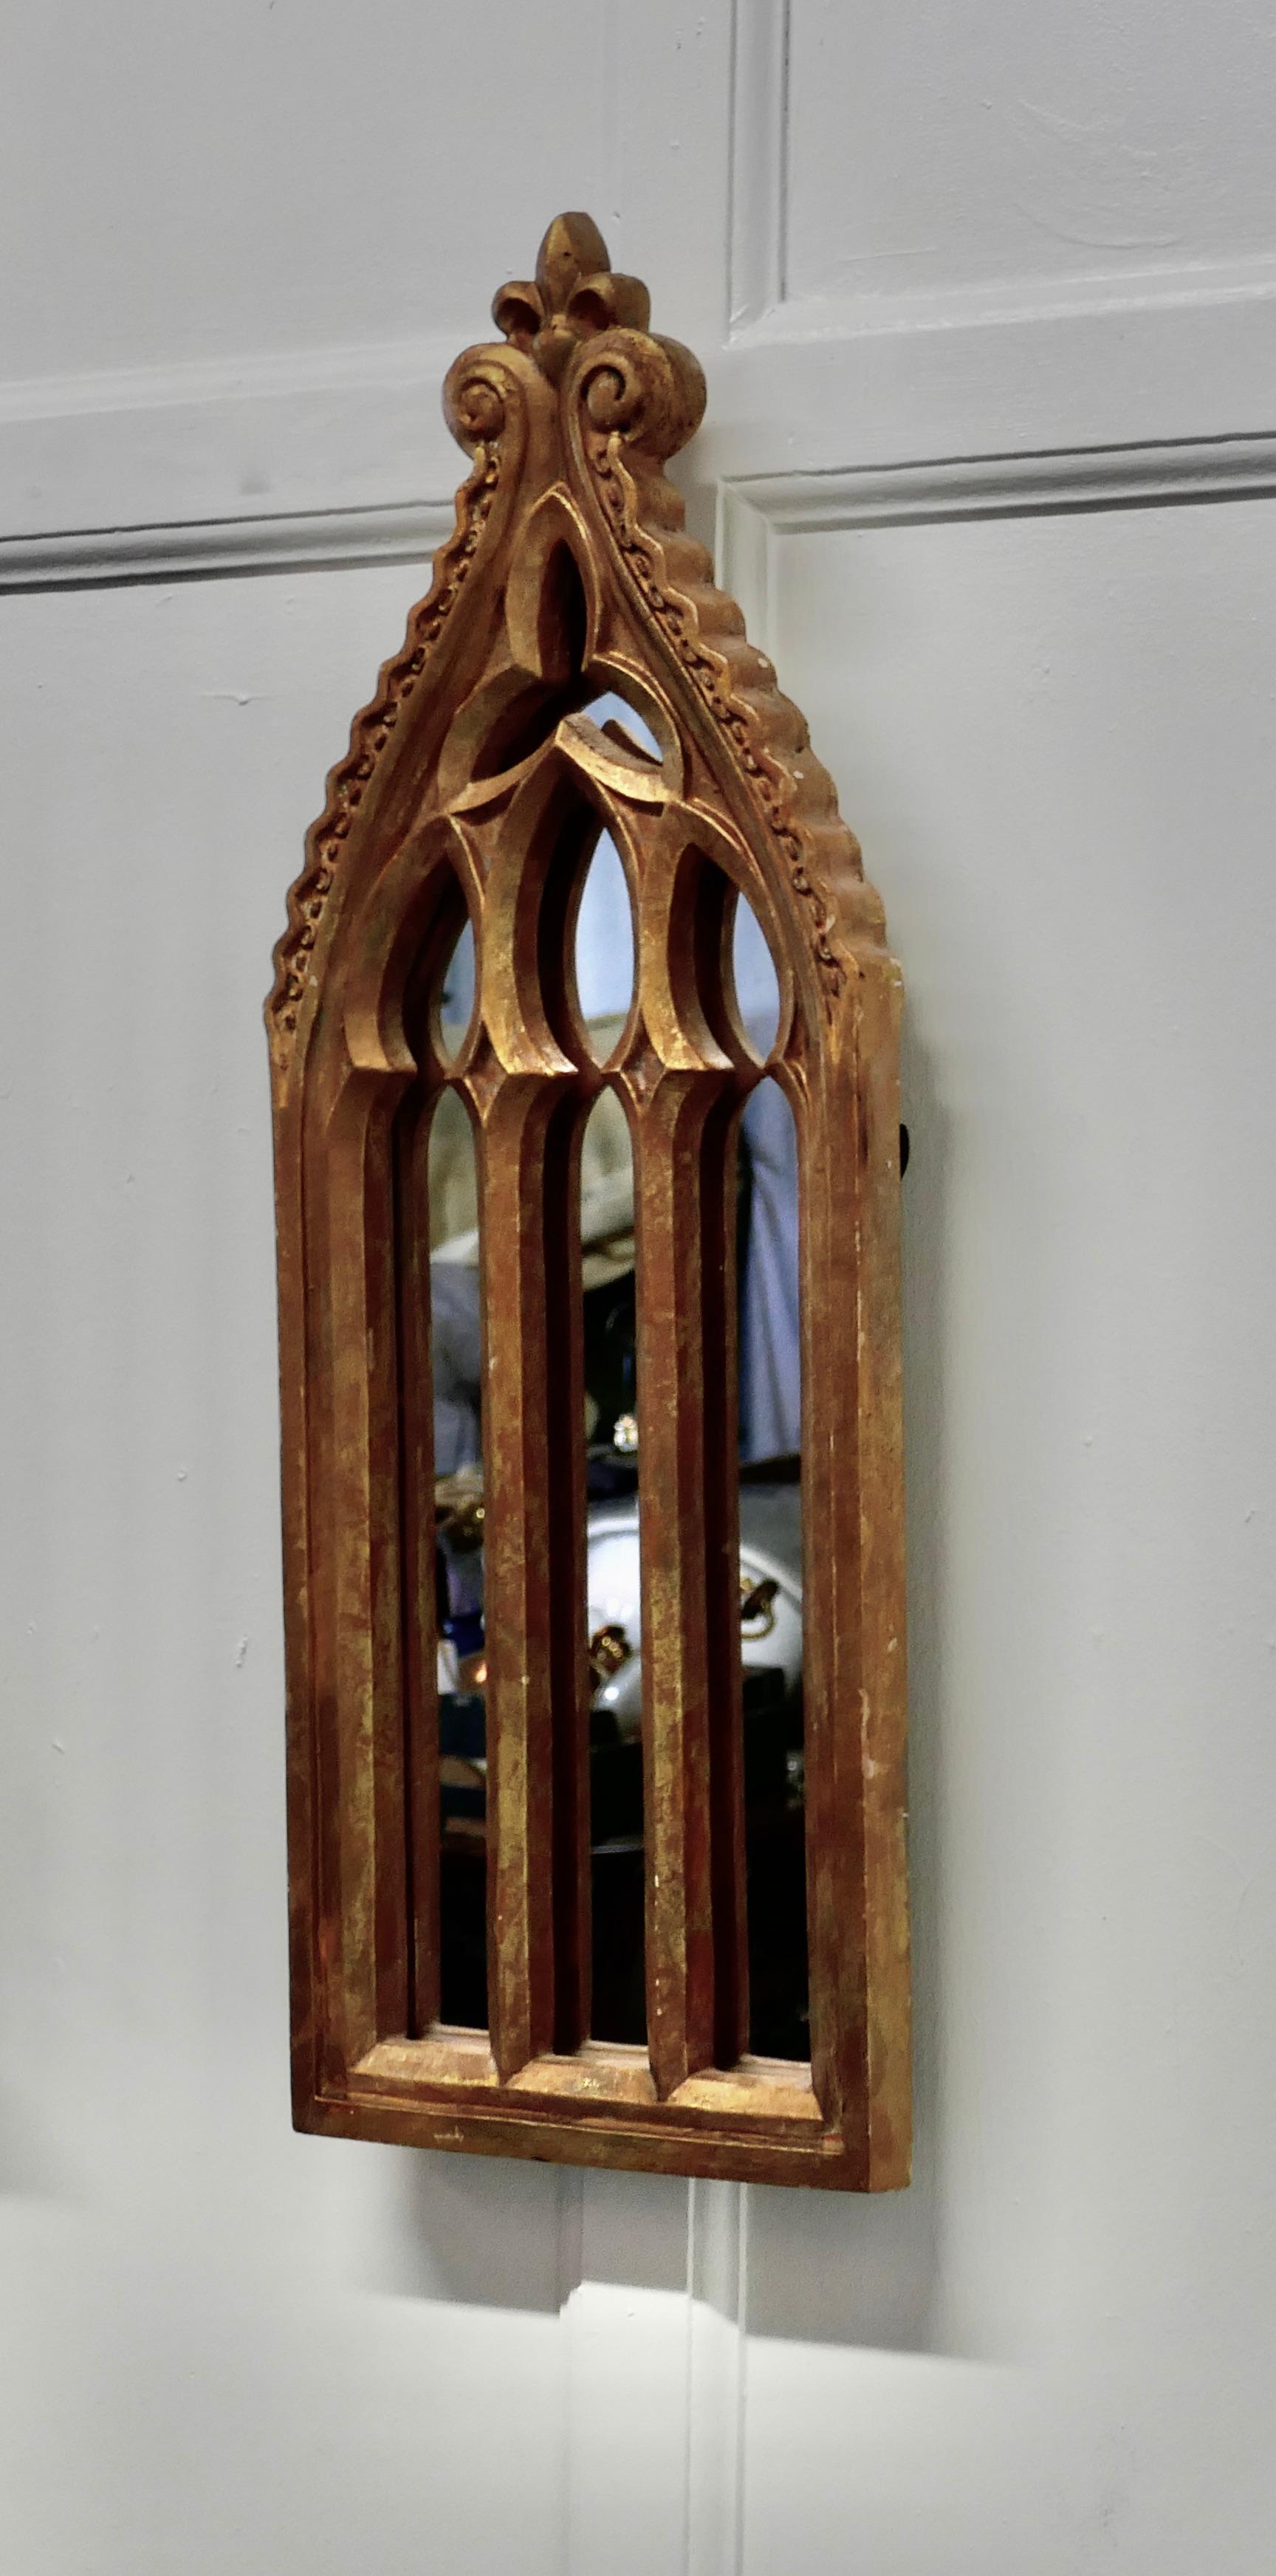 Arts & Crafts Gothic gilt church window mirror

A lovely piece in the Arts & Crafts style, the gilt mirror frame has a divided frame in the shape of a church window

A great piece from the 1960s

TGB160.